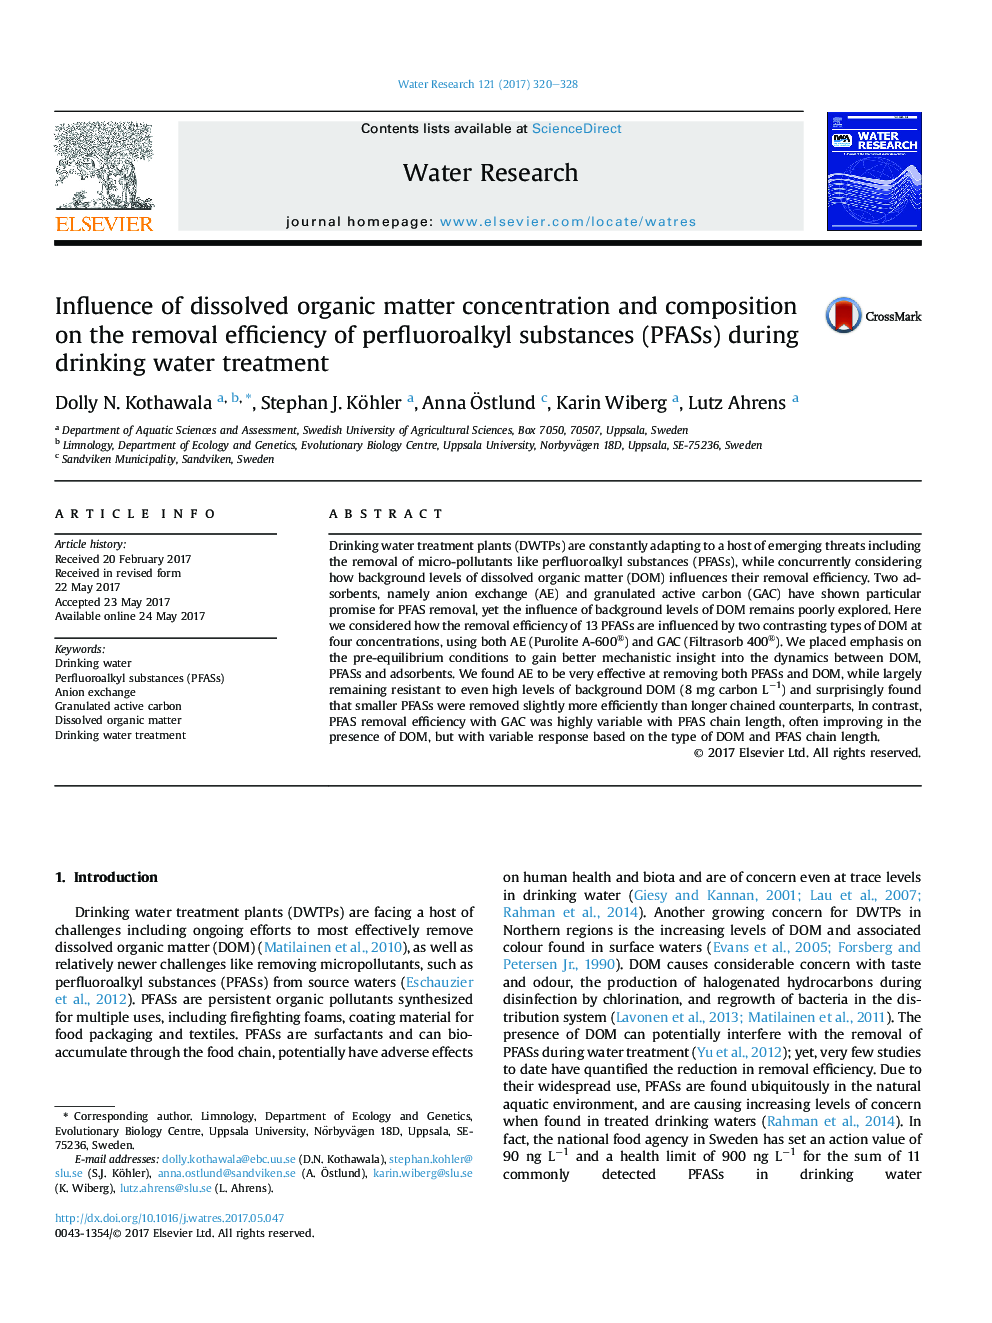 Influence of dissolved organic matter concentration and composition on the removal efficiency of perfluoroalkyl substances (PFASs) during drinking water treatment